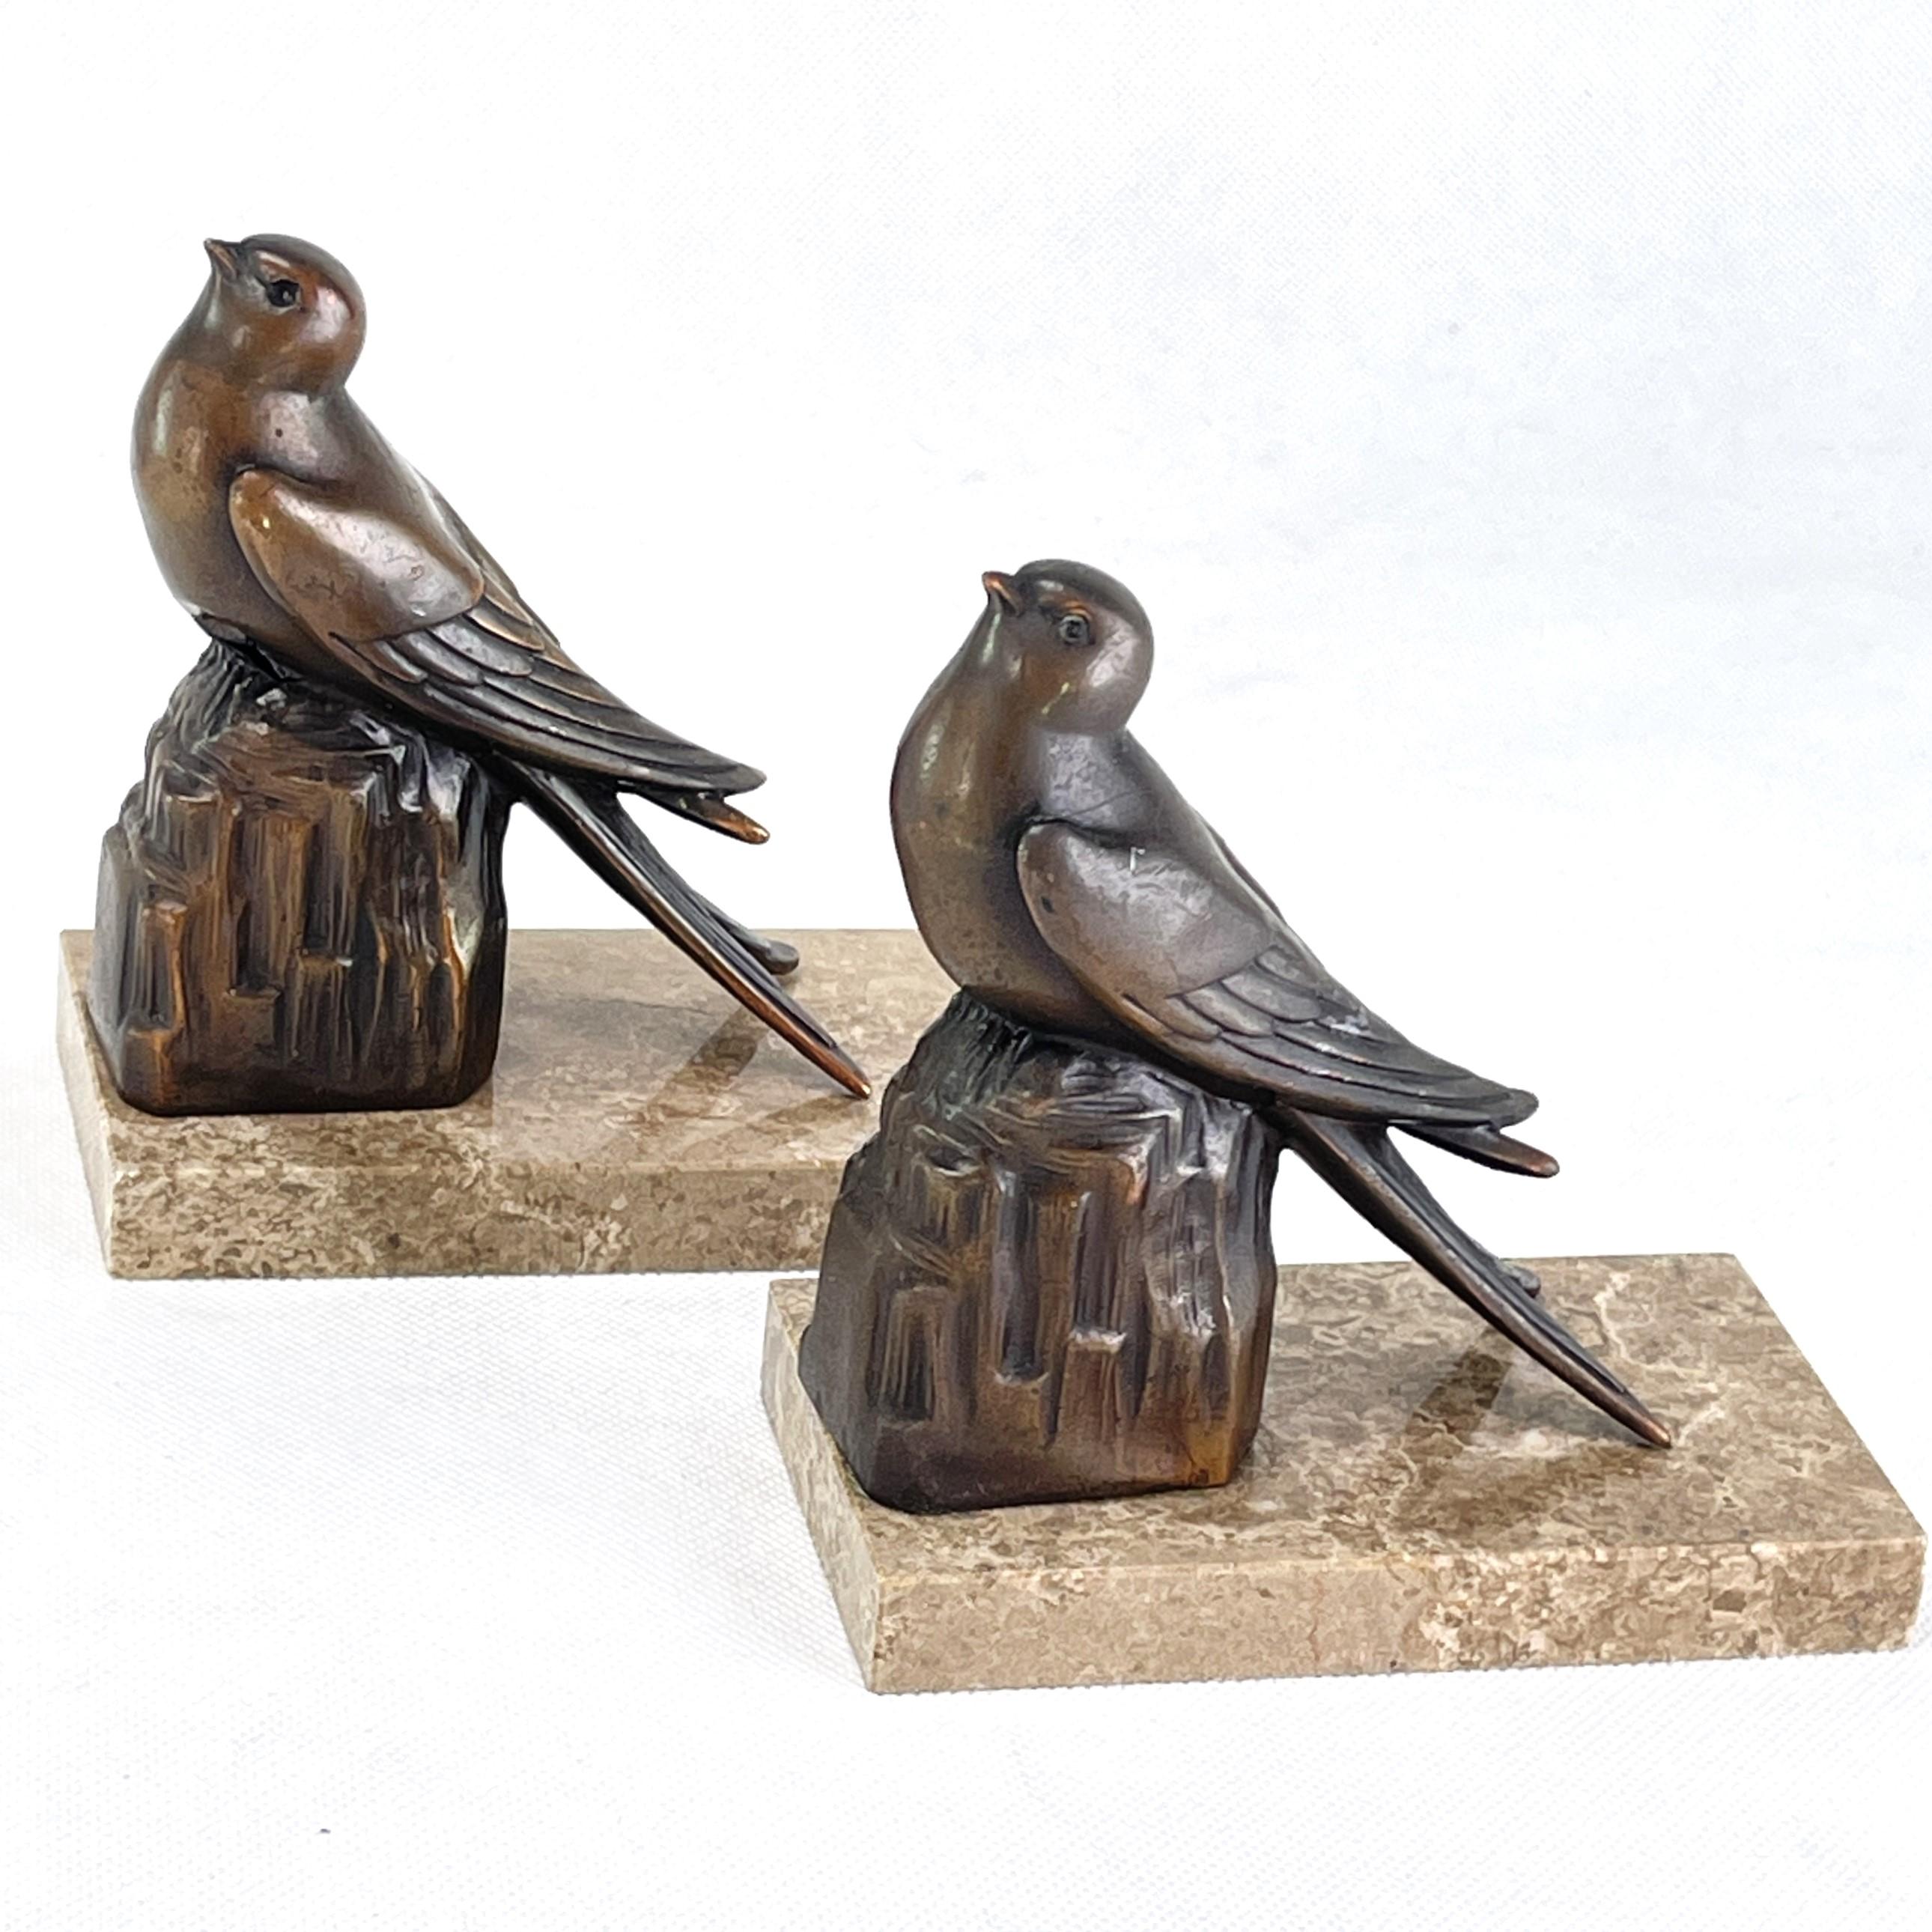 Art Deco bird bookends - 1930s

These two rare bookends are a real design classic from the 30s. The bird supports are original and the patina is still intact.

The cleaned items and each weights 1 kg / 2.2 lbs.